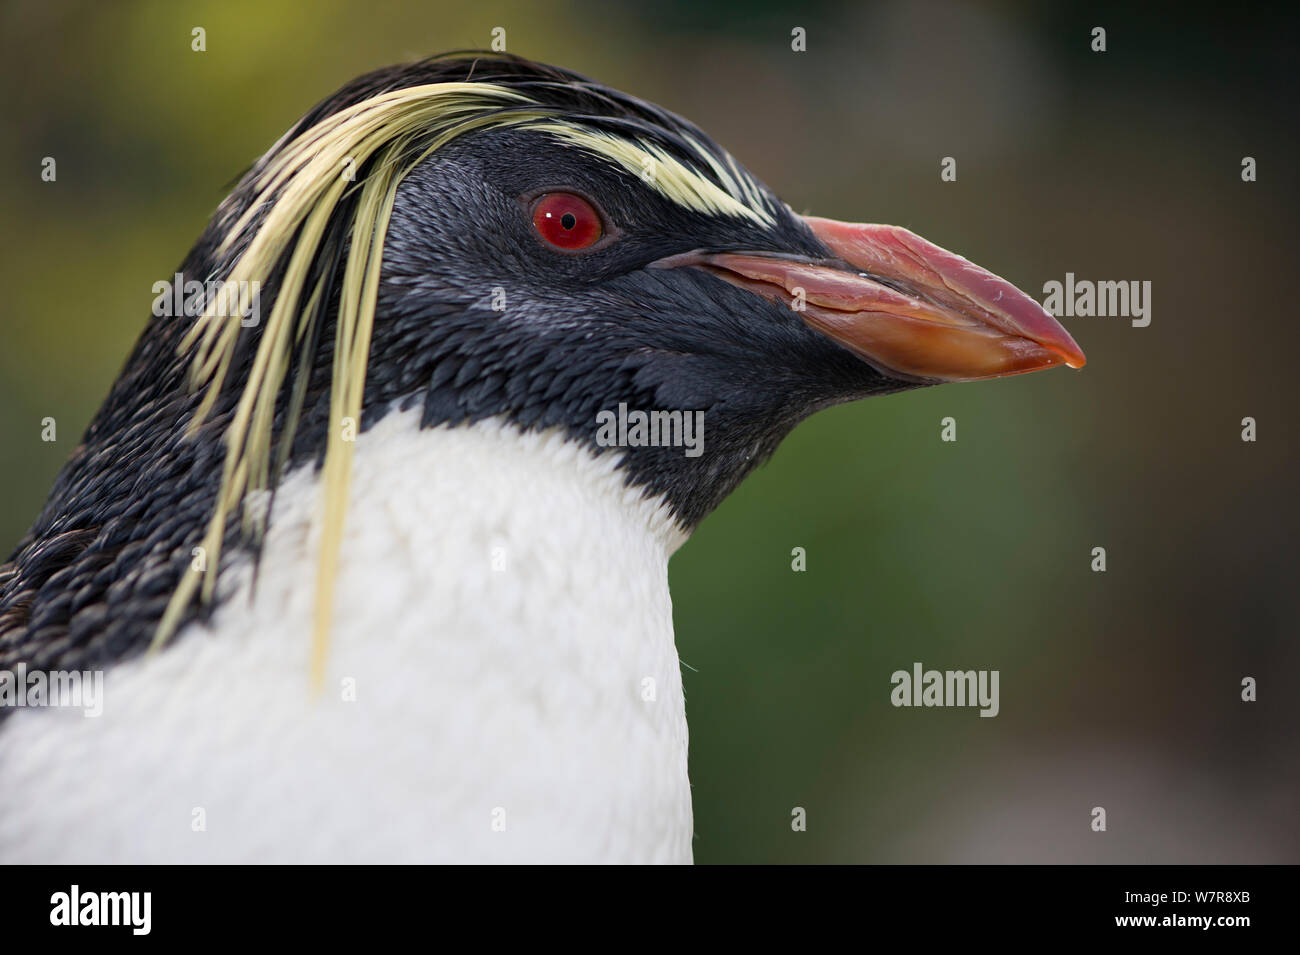 Southern rockhopper penguin, (Eudyptes chrysocome). Southern African Foundation for the Conservation of Coastal Birds (SANCCOB), South Africa, Cape Town, South Africa. 'Rocky' is tame (captive) and is used for educational purposes by SANCCOB. May 2012 Stock Photo